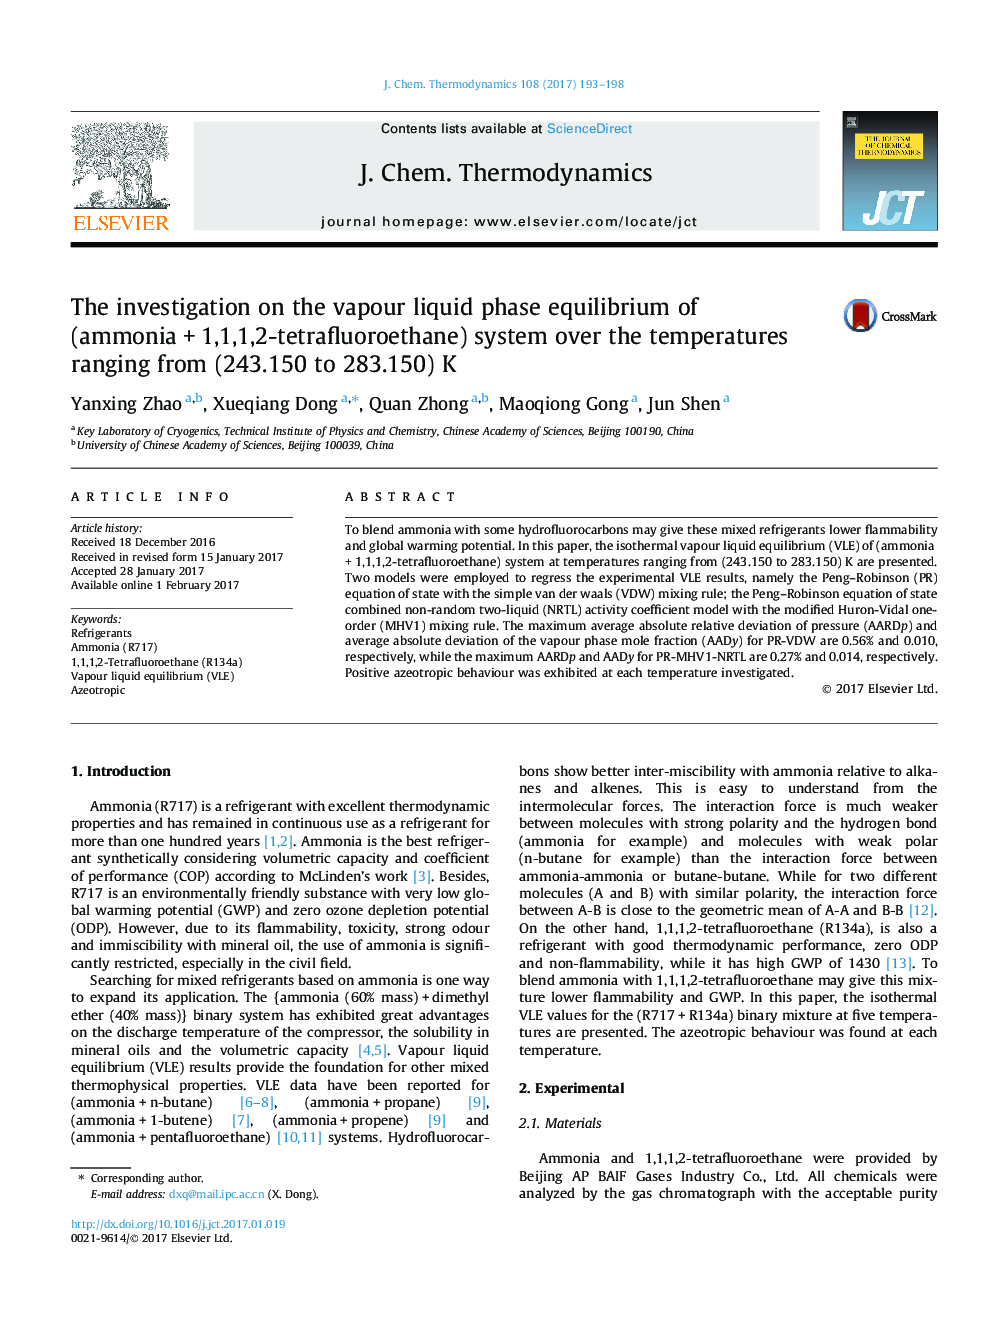 The investigation on the vapour liquid phase equilibrium of (ammoniaÂ +Â 1,1,1,2-tetrafluoroethane) system over the temperatures ranging from (243.150 to 283.150) K